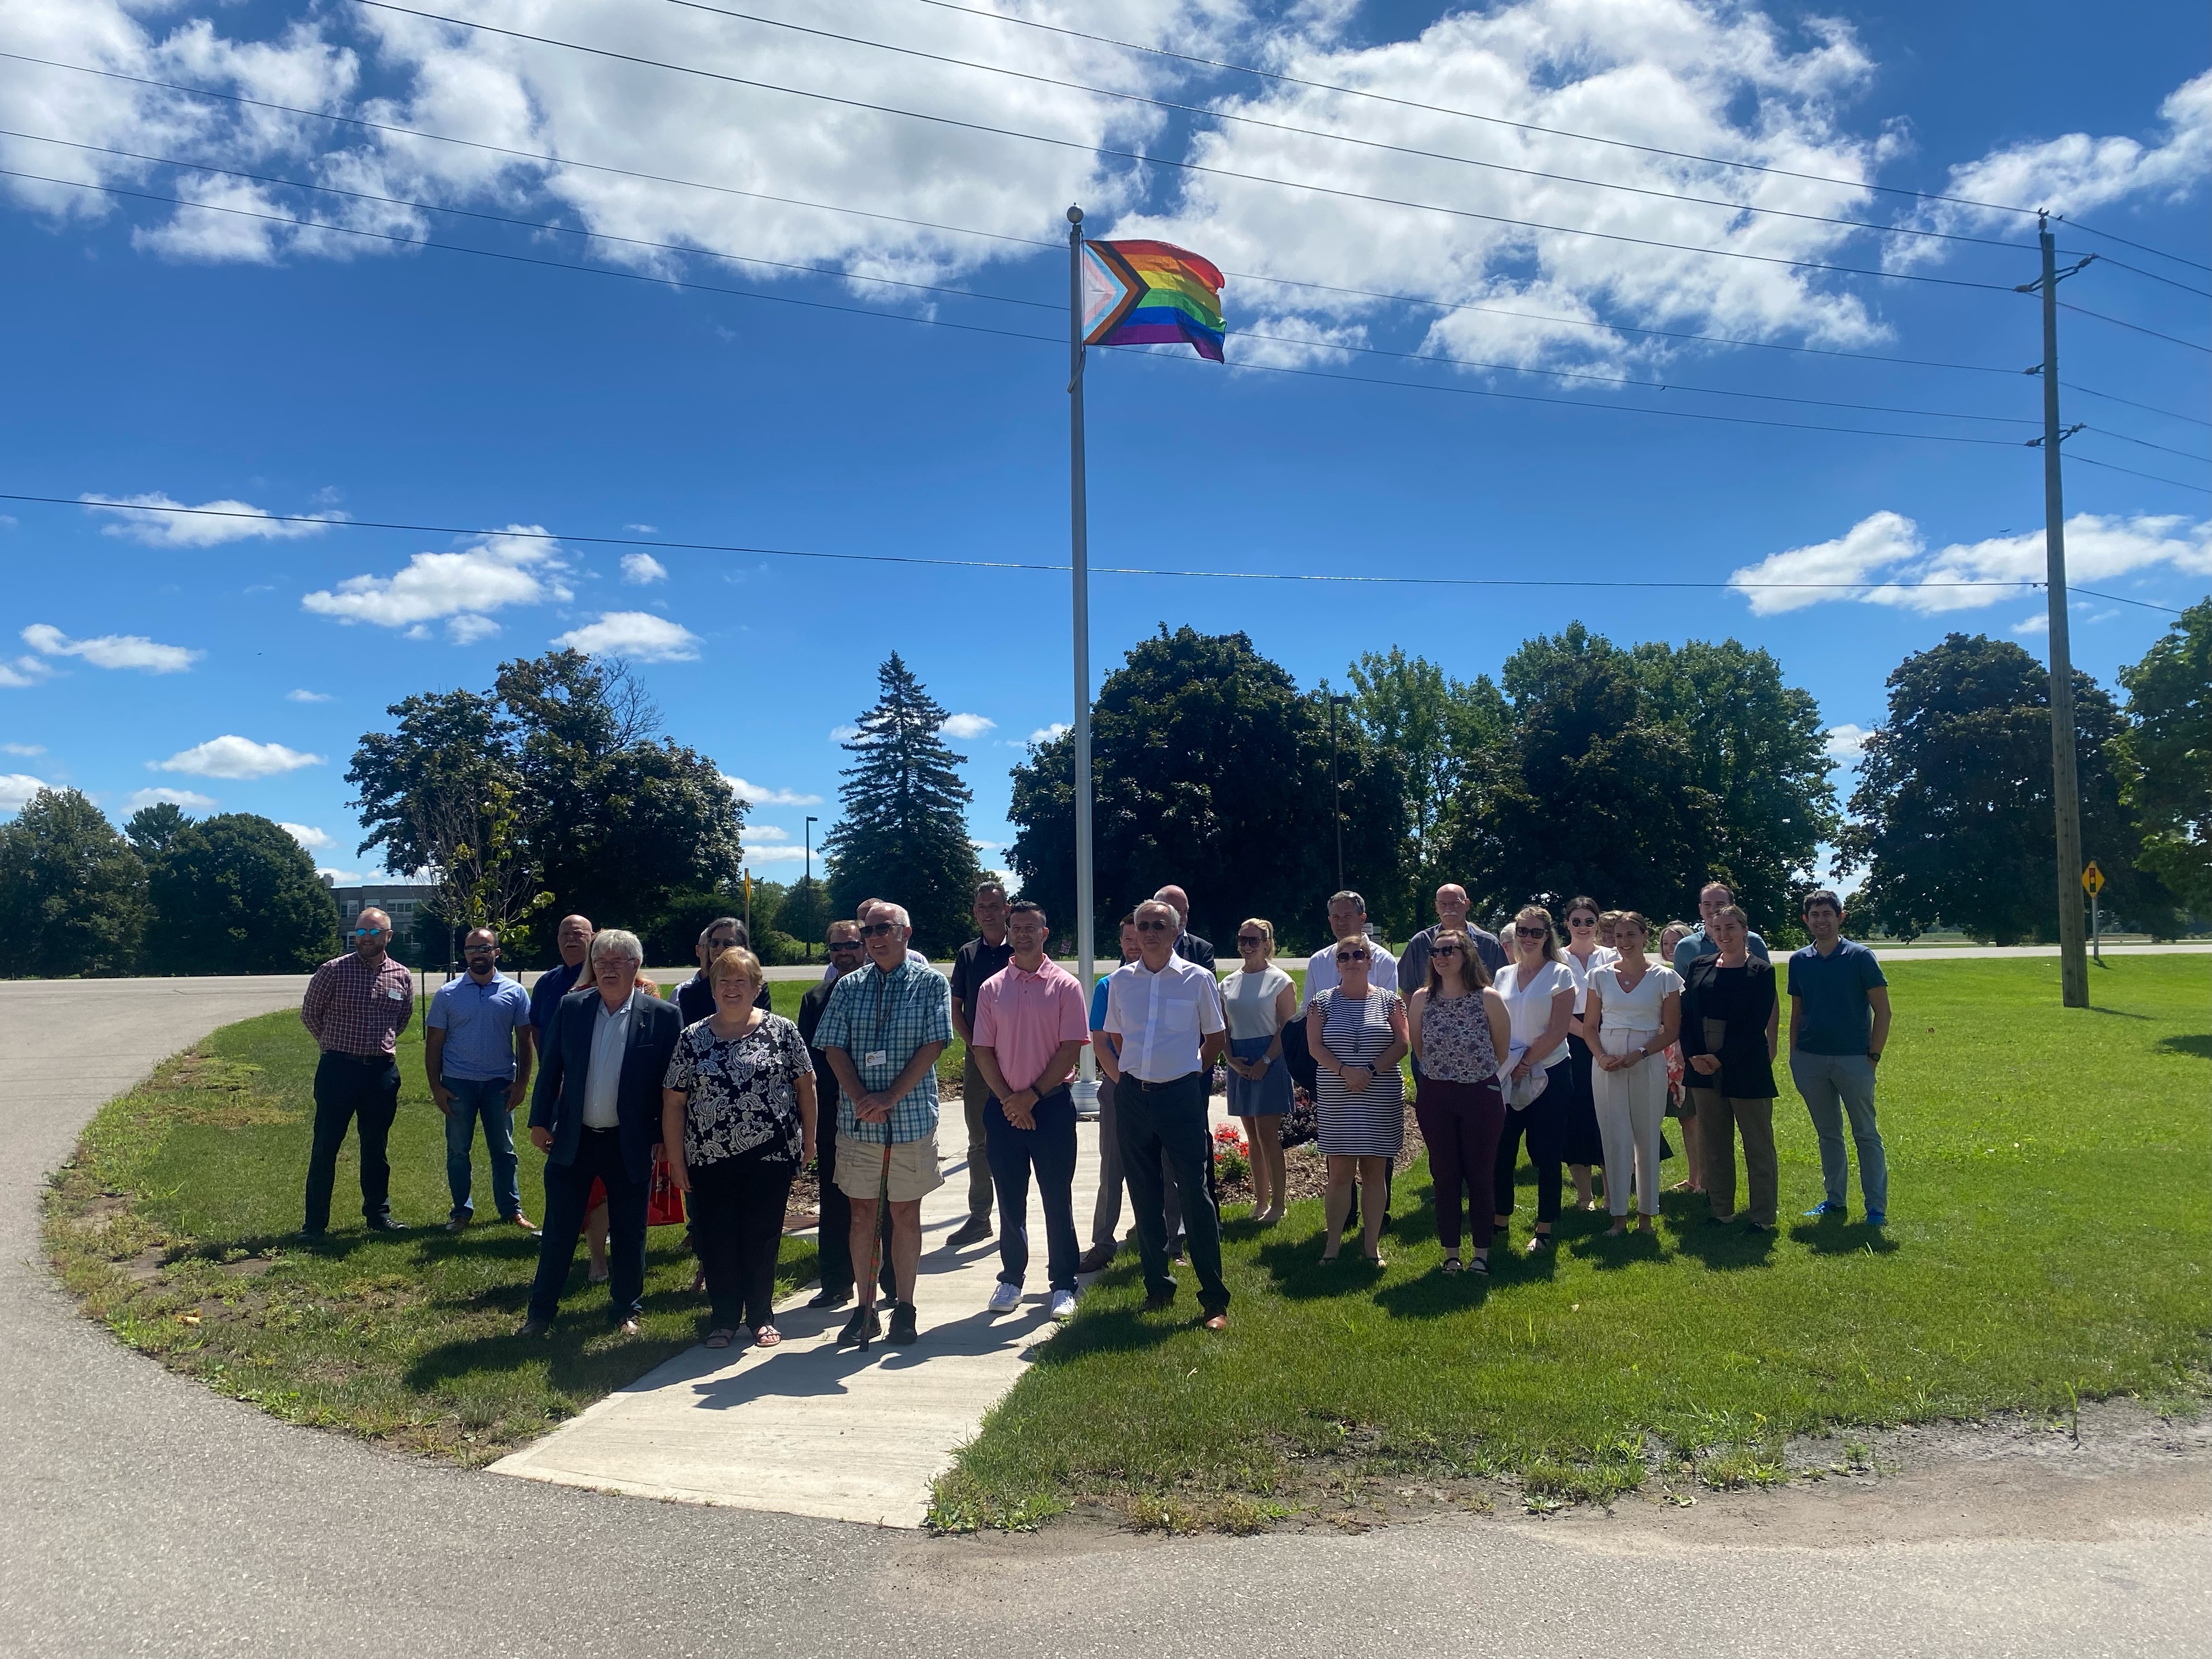 A group of people standing in front of a flag pole flying the Pride flag, there are clouds in the sky but the day is sunny. 